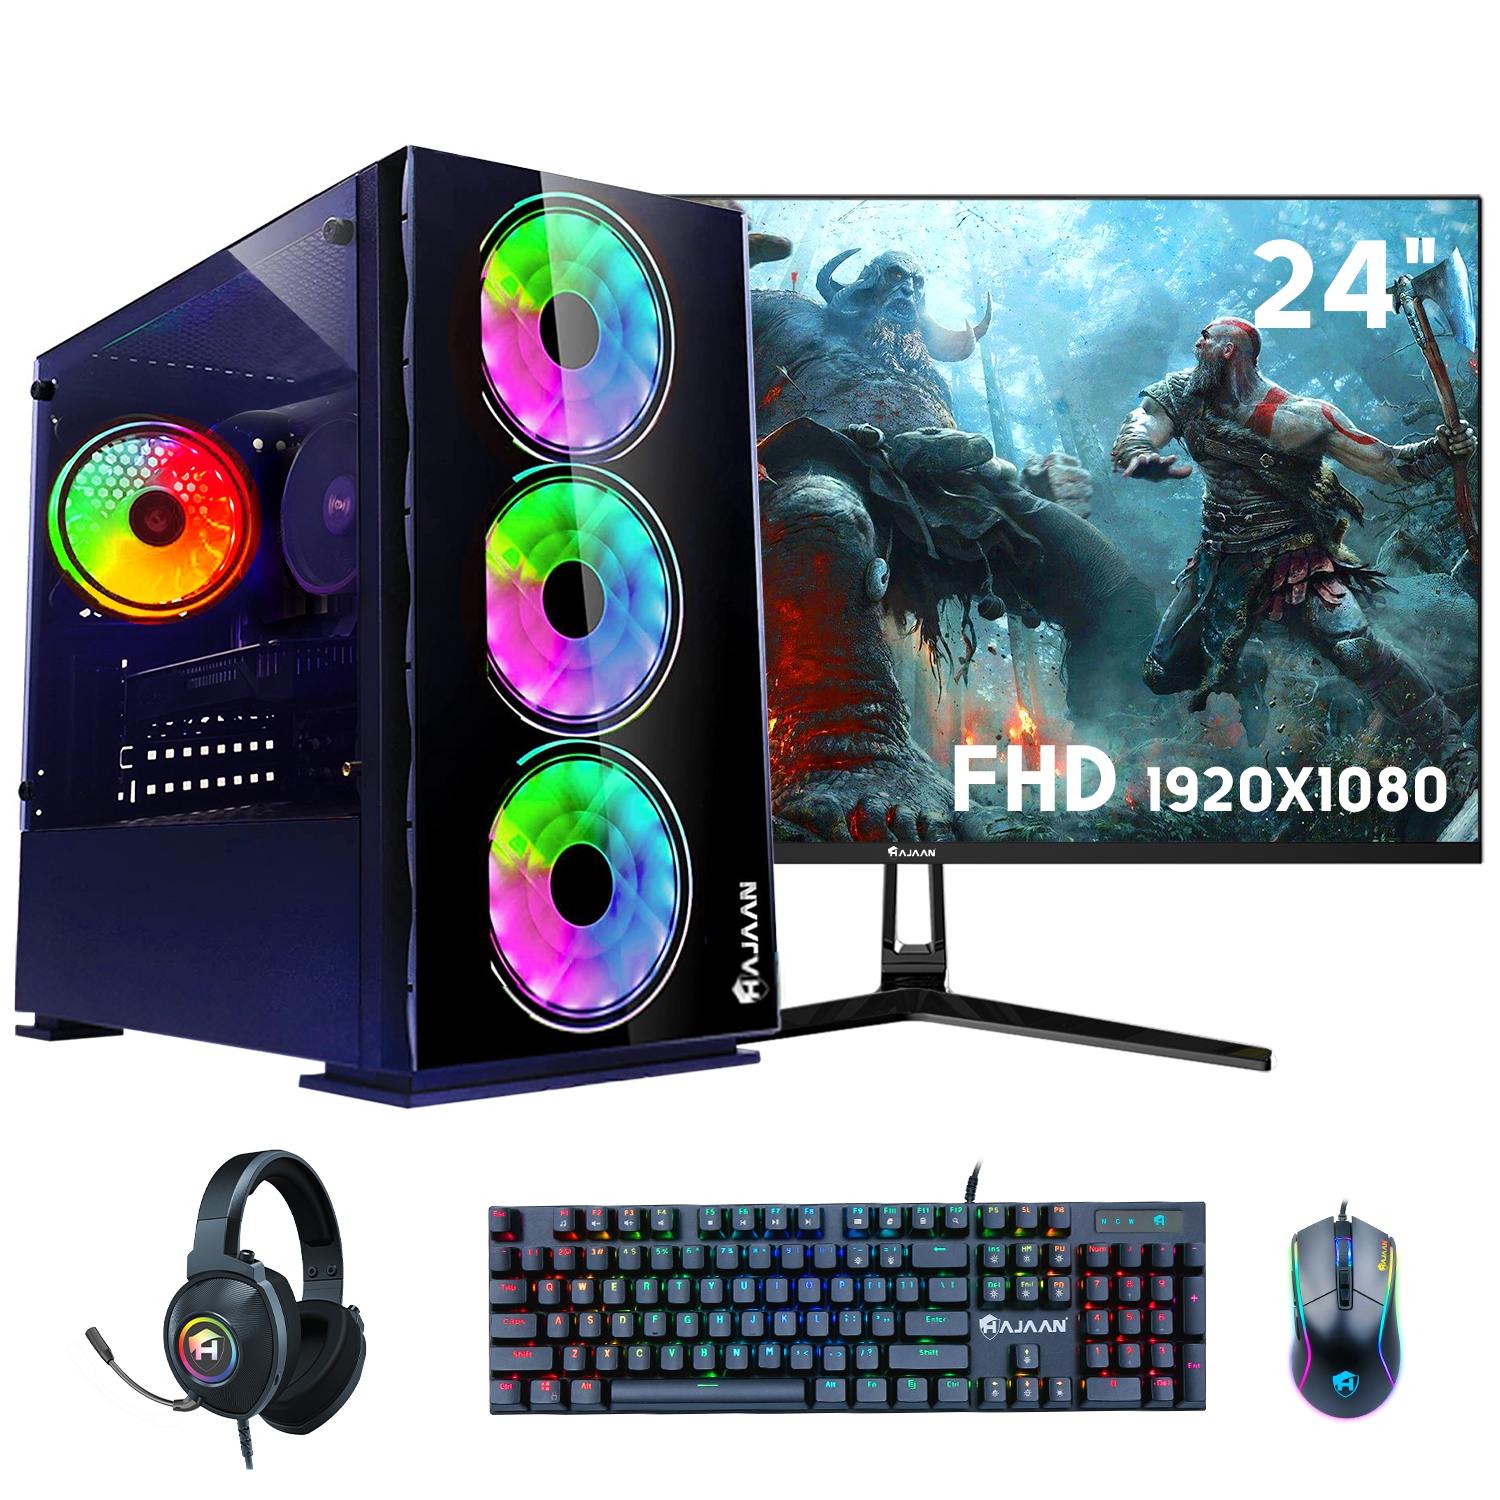 Refurbished (Excellent) Gaming PC Desktop Tower, Intel Core i7 3.6GHz, AMD Radeon RX 580 8GB, 32GB RAM 1TB SSD, 24″ Gaming Monitor, Gaming Keyboard Mouse, AC WiFi, W10P64